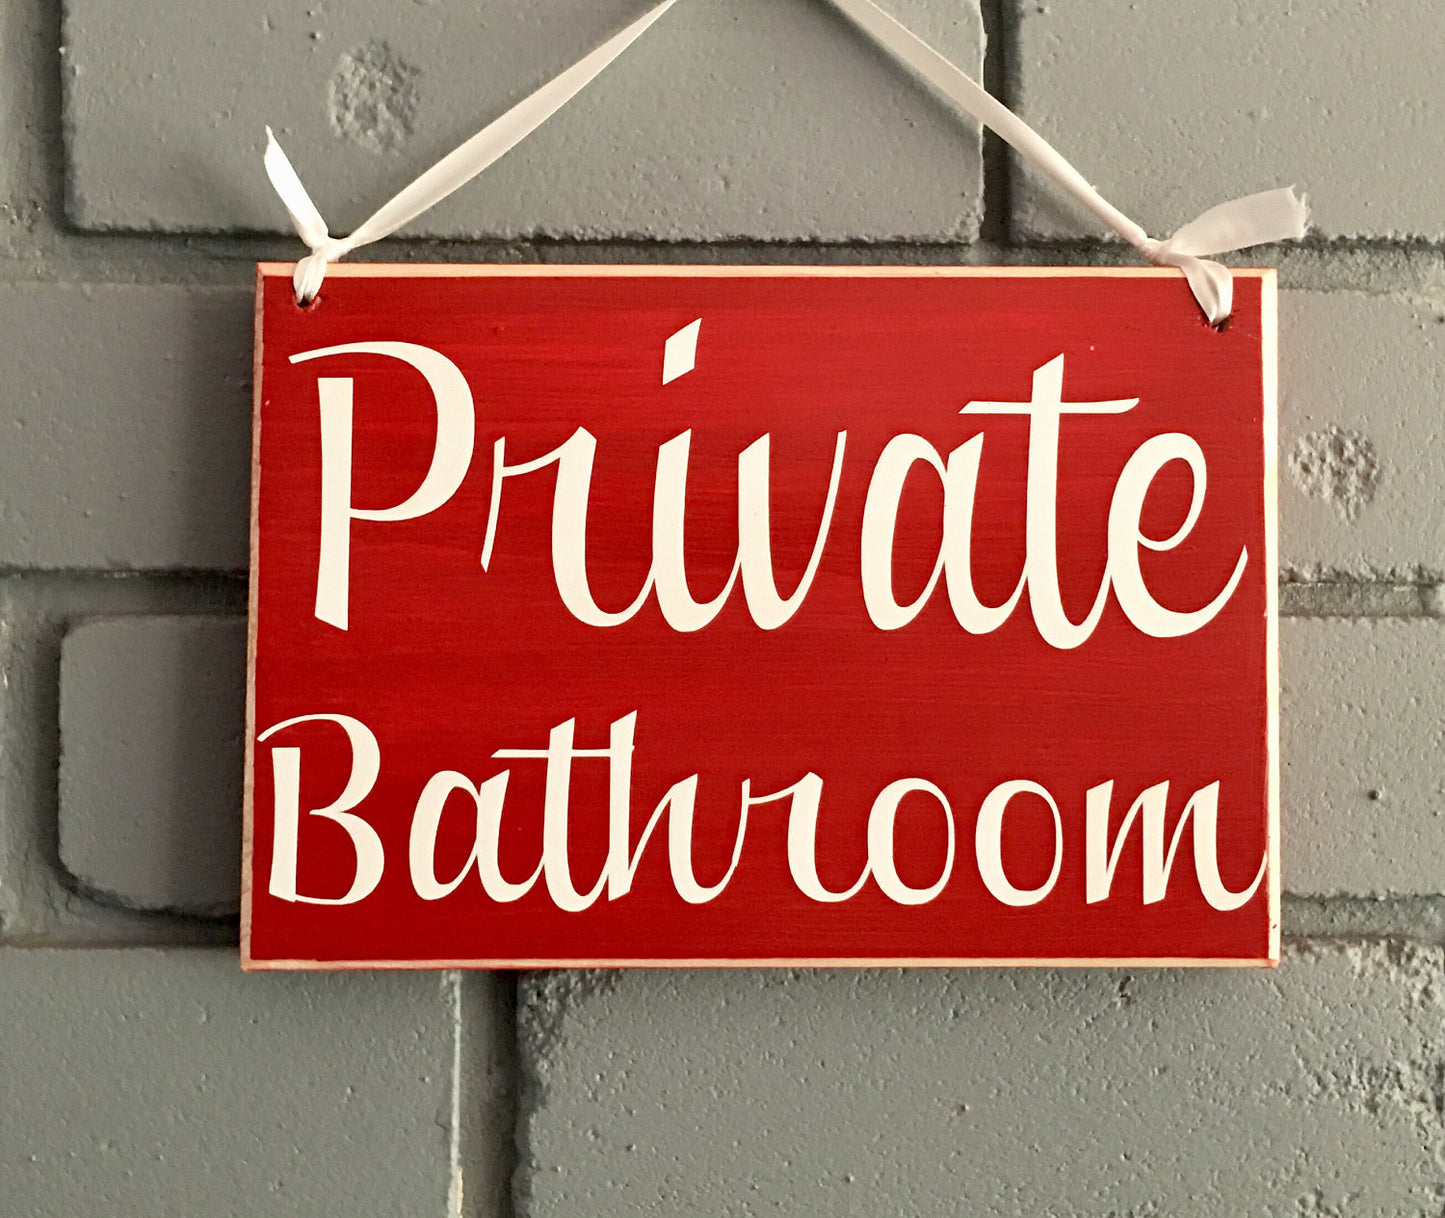 Private Bathroom Custom Wood Sign 8x6 Bathroom Restroom Outhouse Washroom Office Business Hotel Spa Welcome Door Plaque